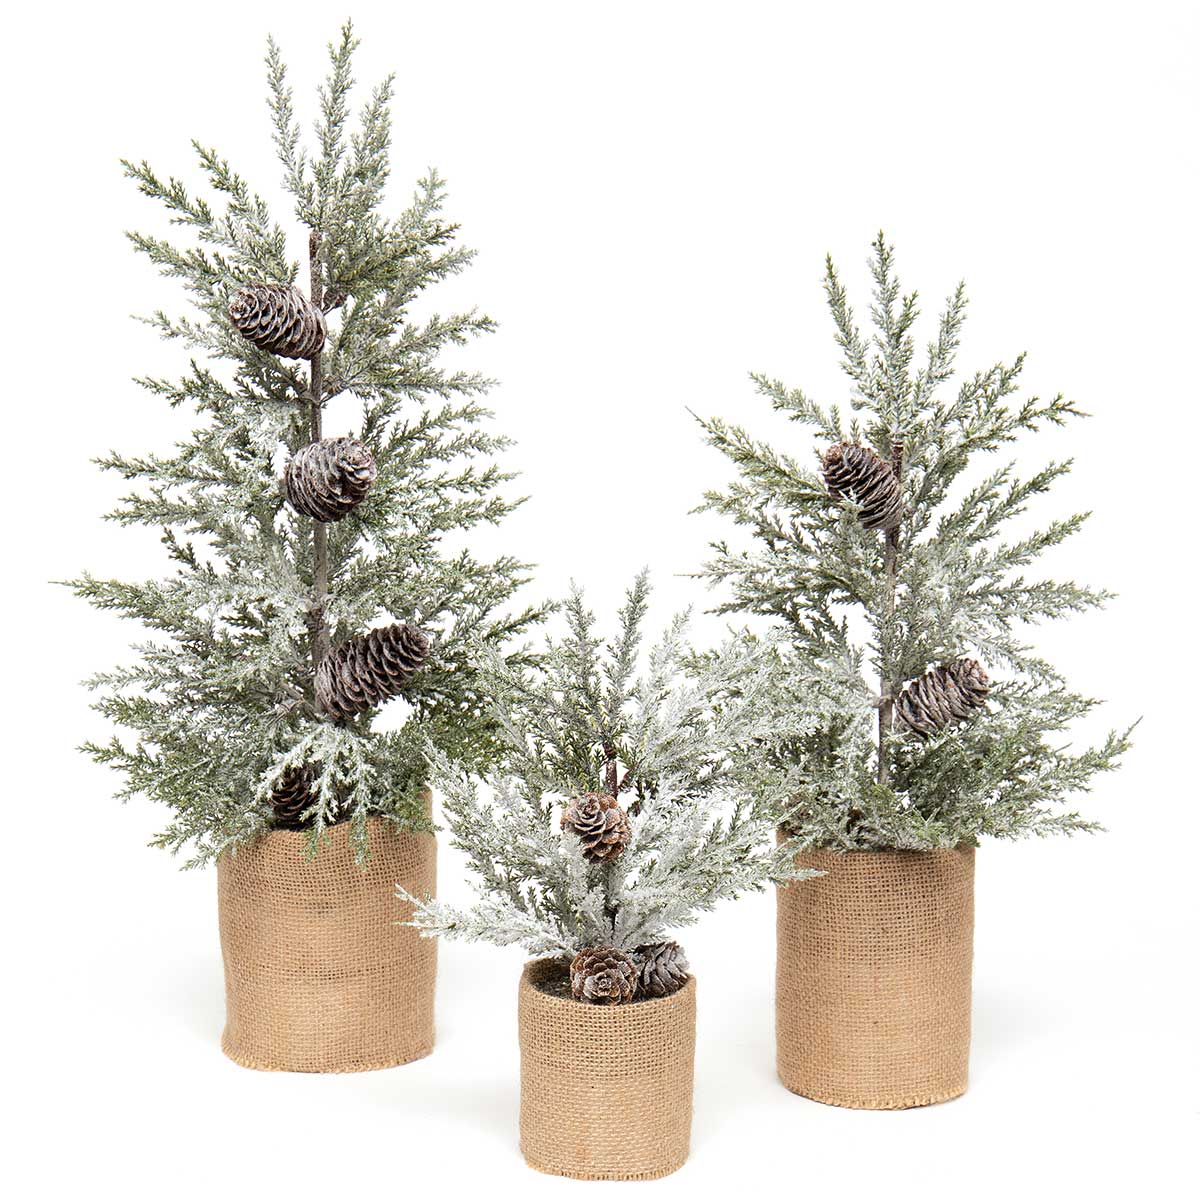 EVERGREEN PINE TREE IN BURLAP BASE WITH SNOW